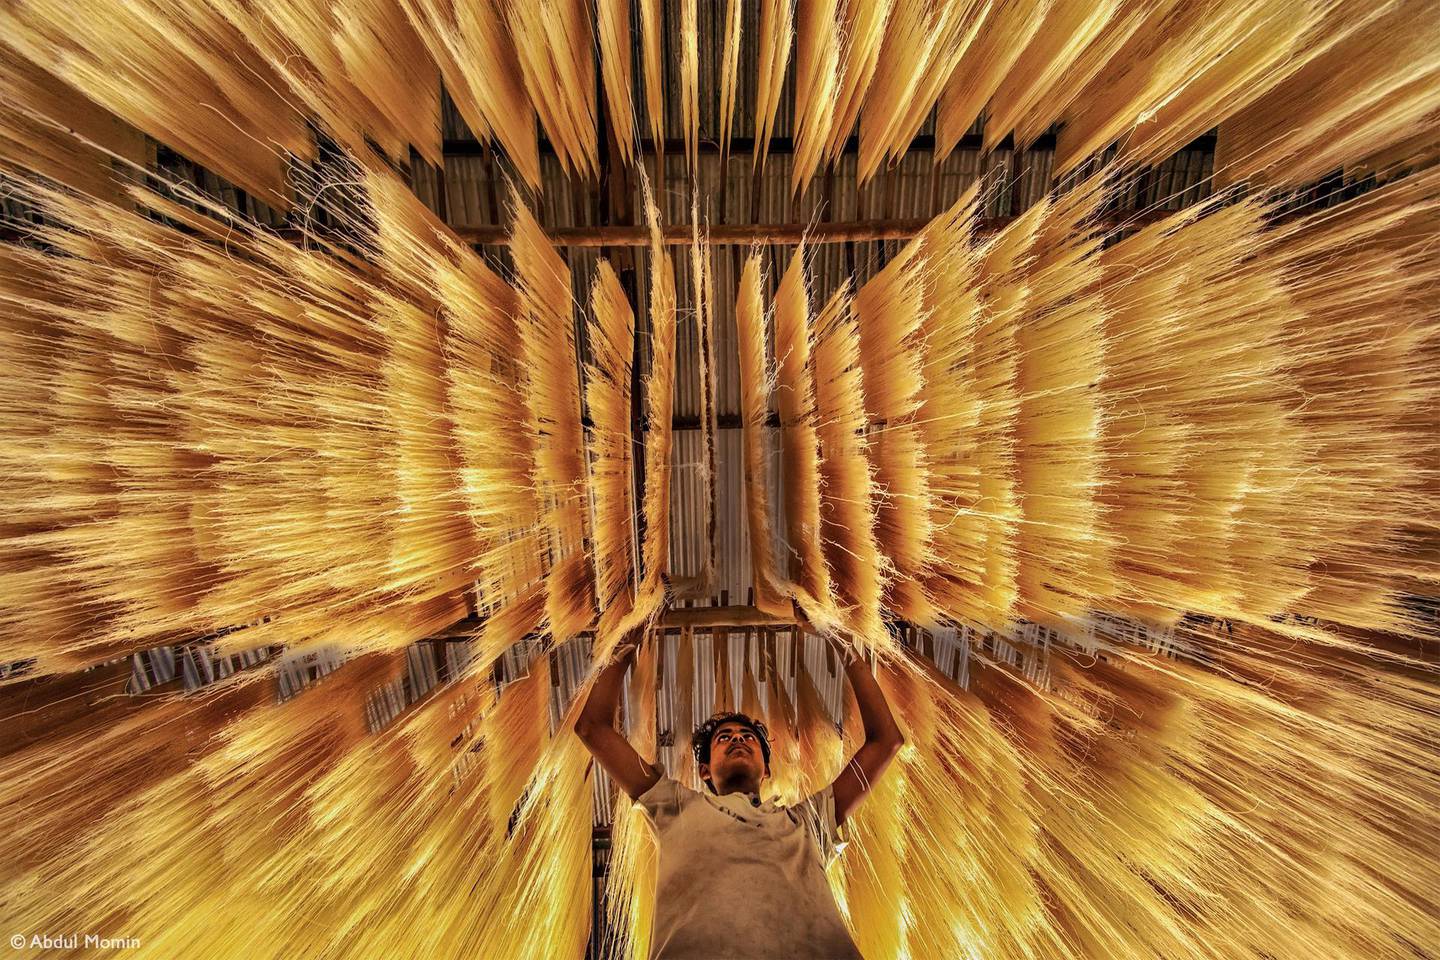 Abdul Momin's image 'Making Rice Noodles' won the Fujifilm Award for Innovation. Courtesy Abdul Momin and Pink Lady Food Photographer of the Year 2021